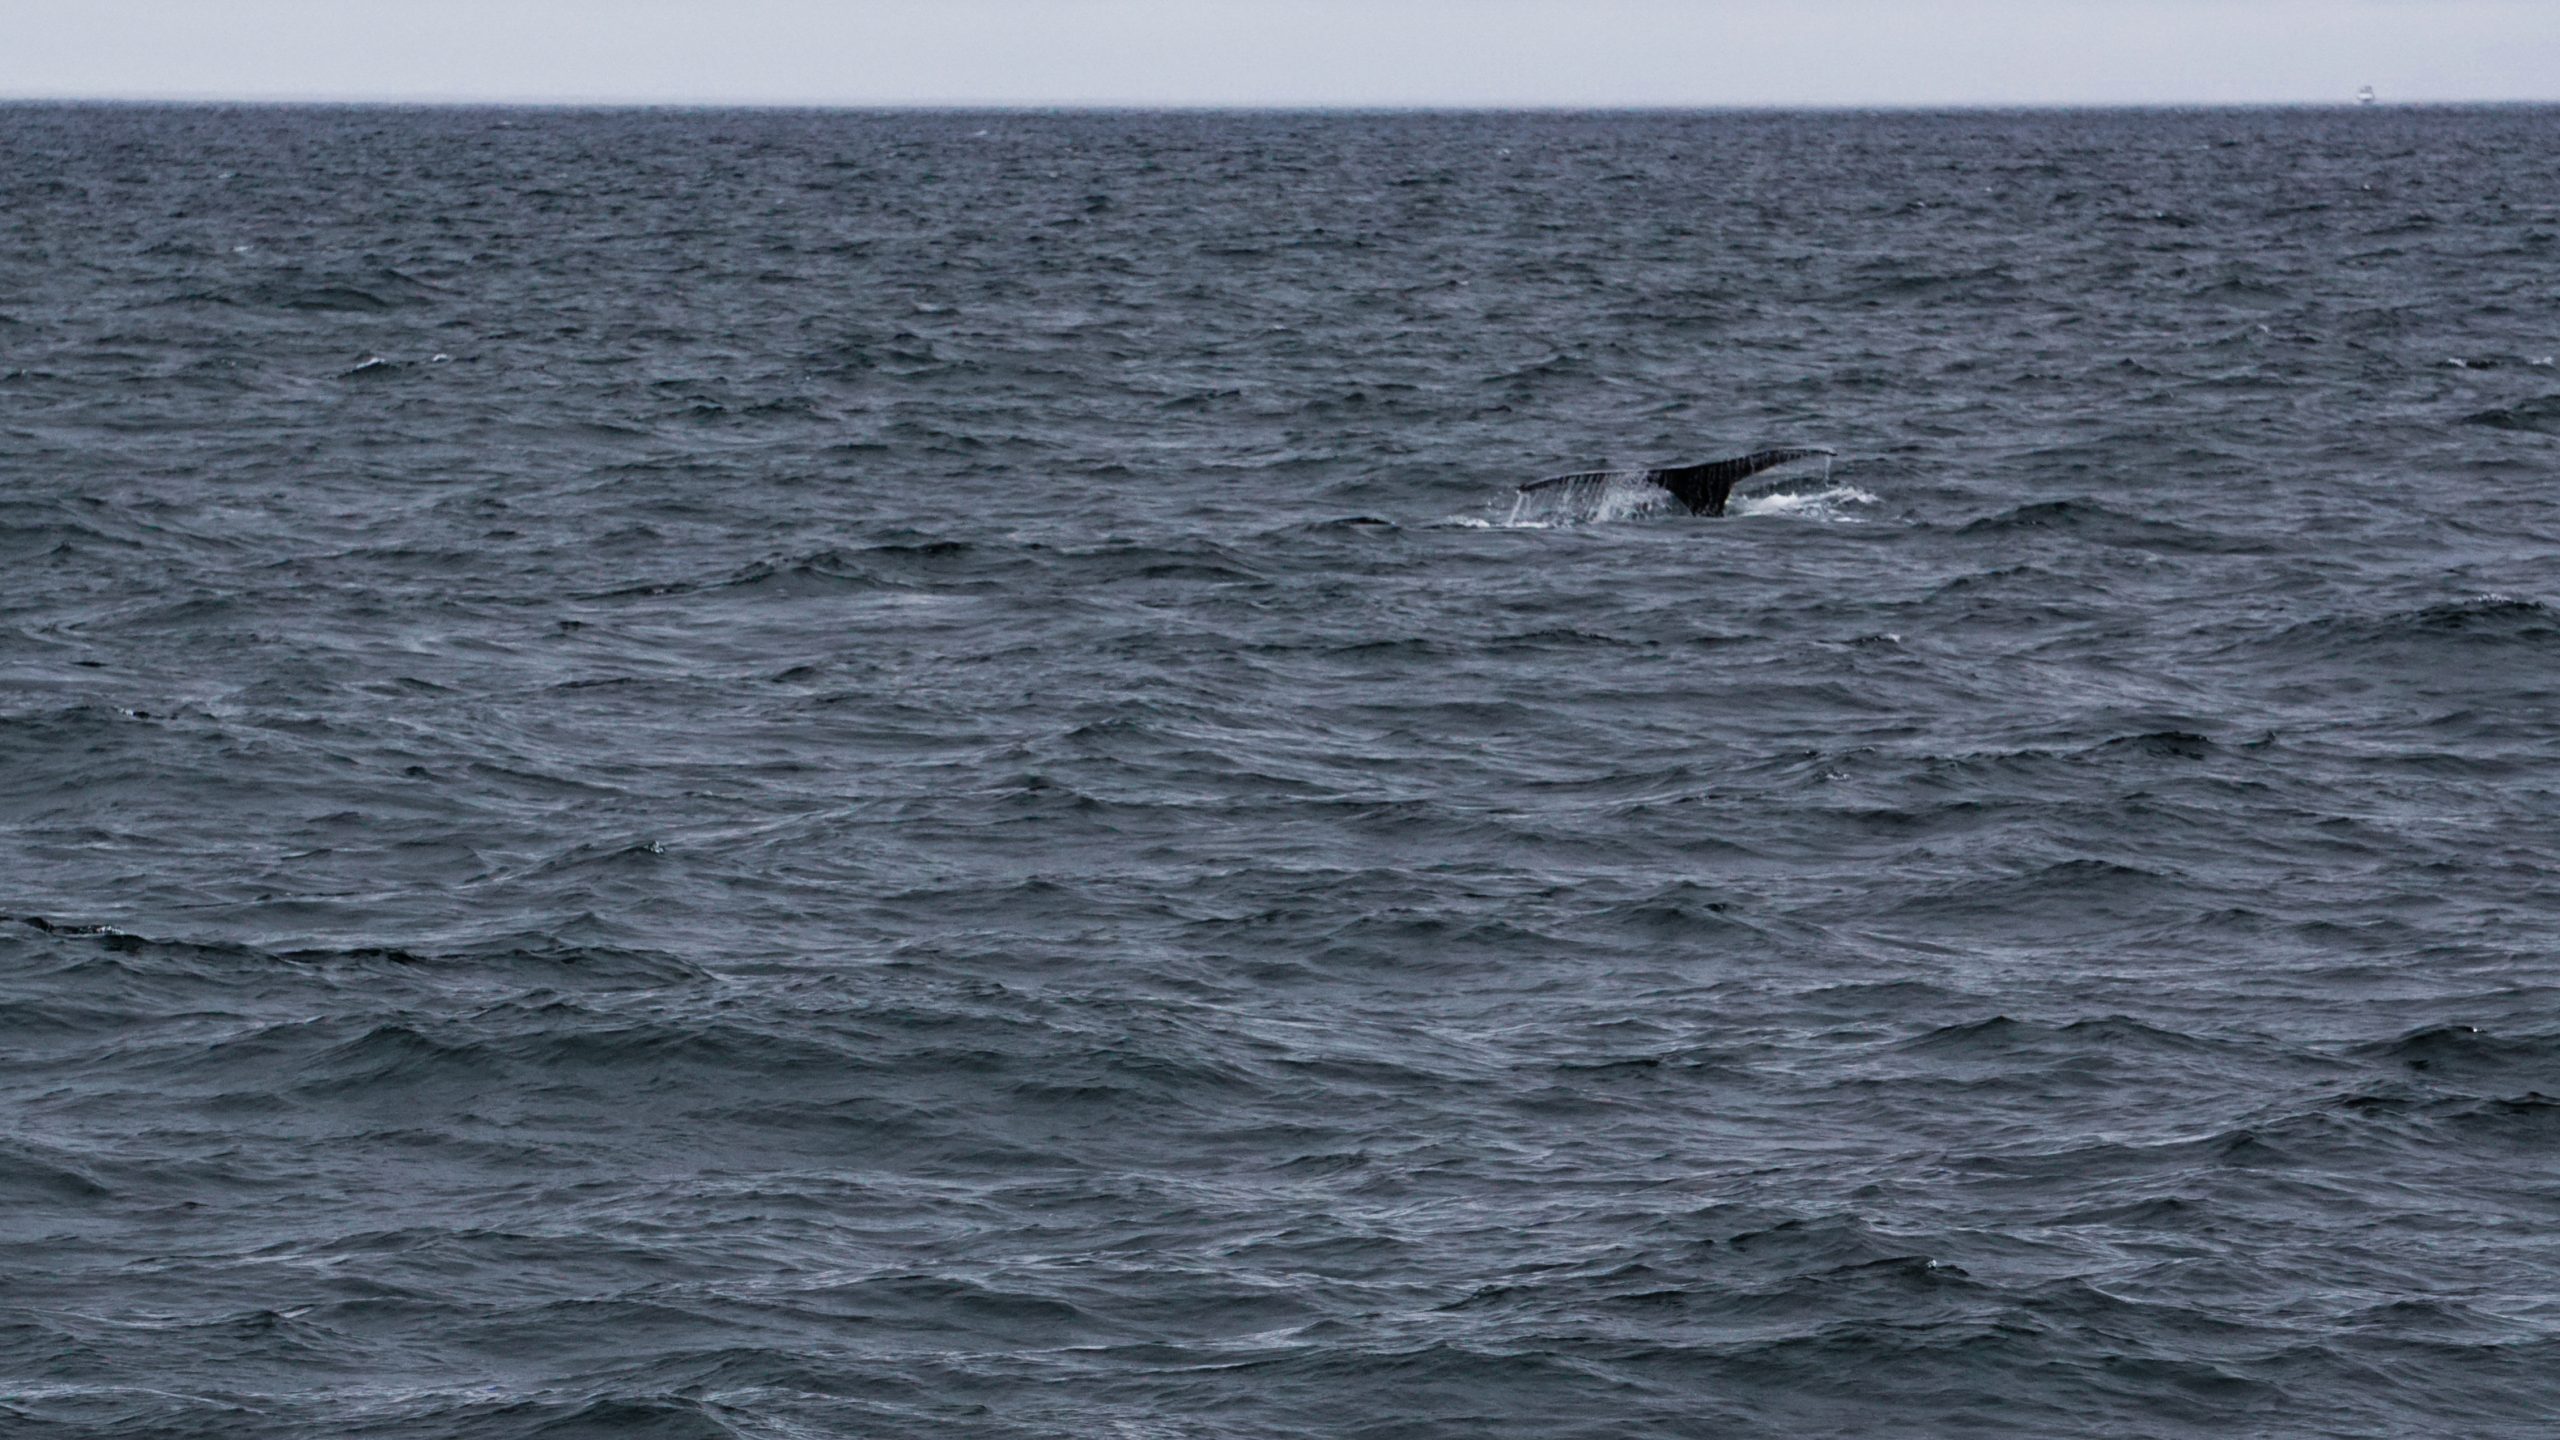 The tail of a humpback whale in the see